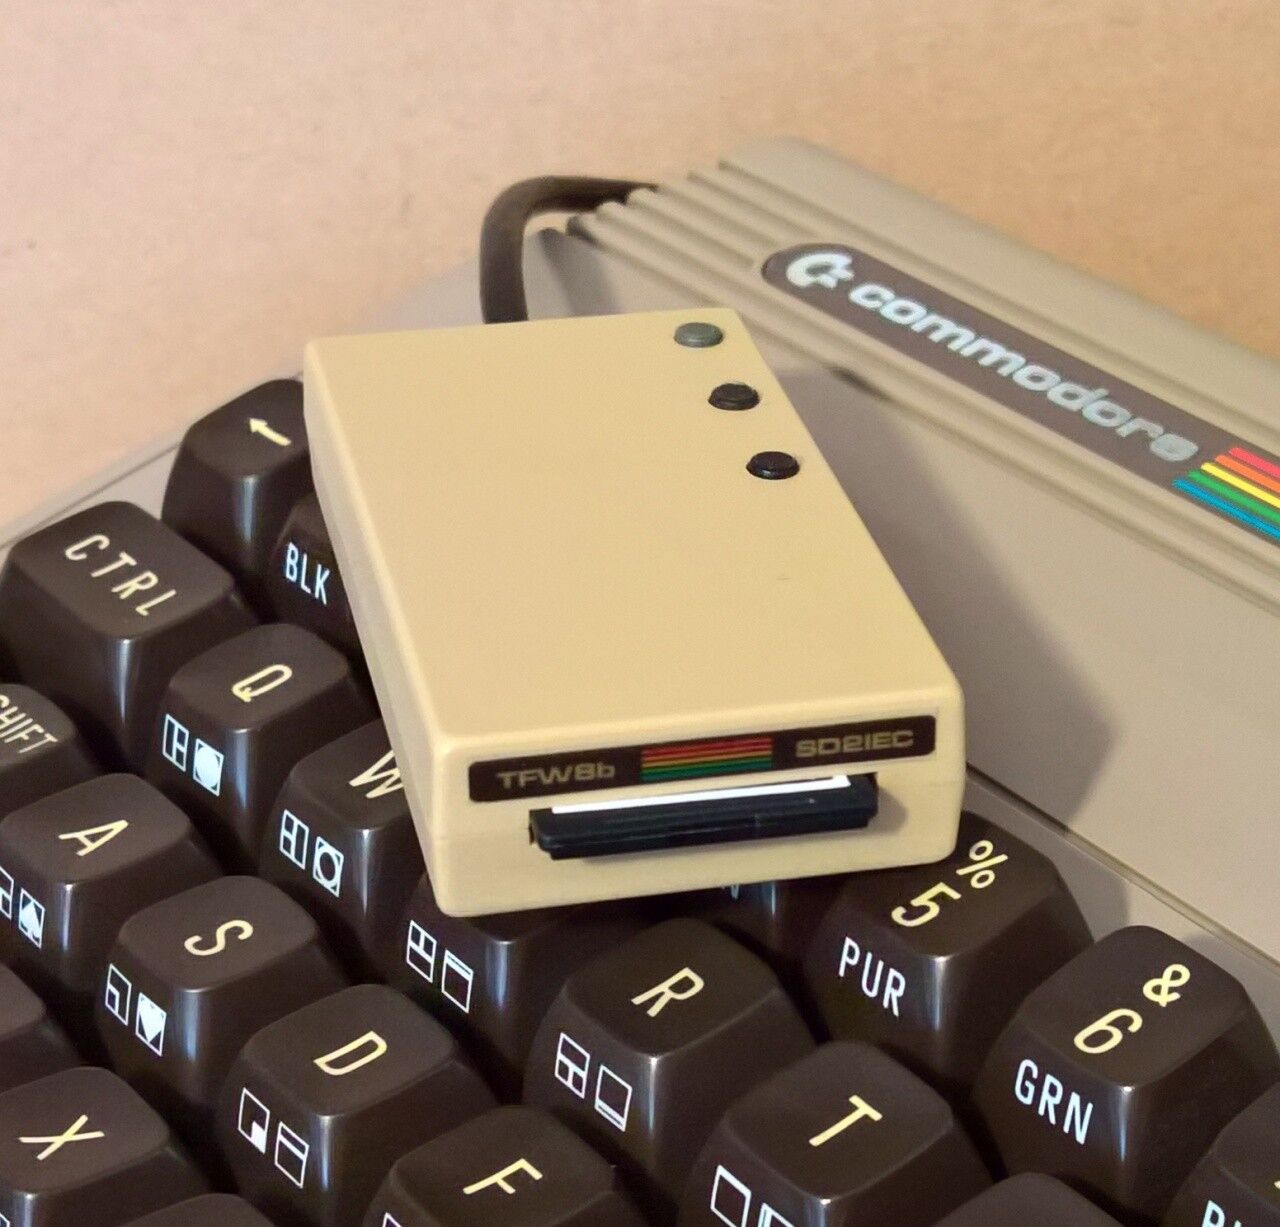 Beige SD2IEC Commodore 1541 Disk Drive Emulation SD Card Reader Vic20 C128 C64